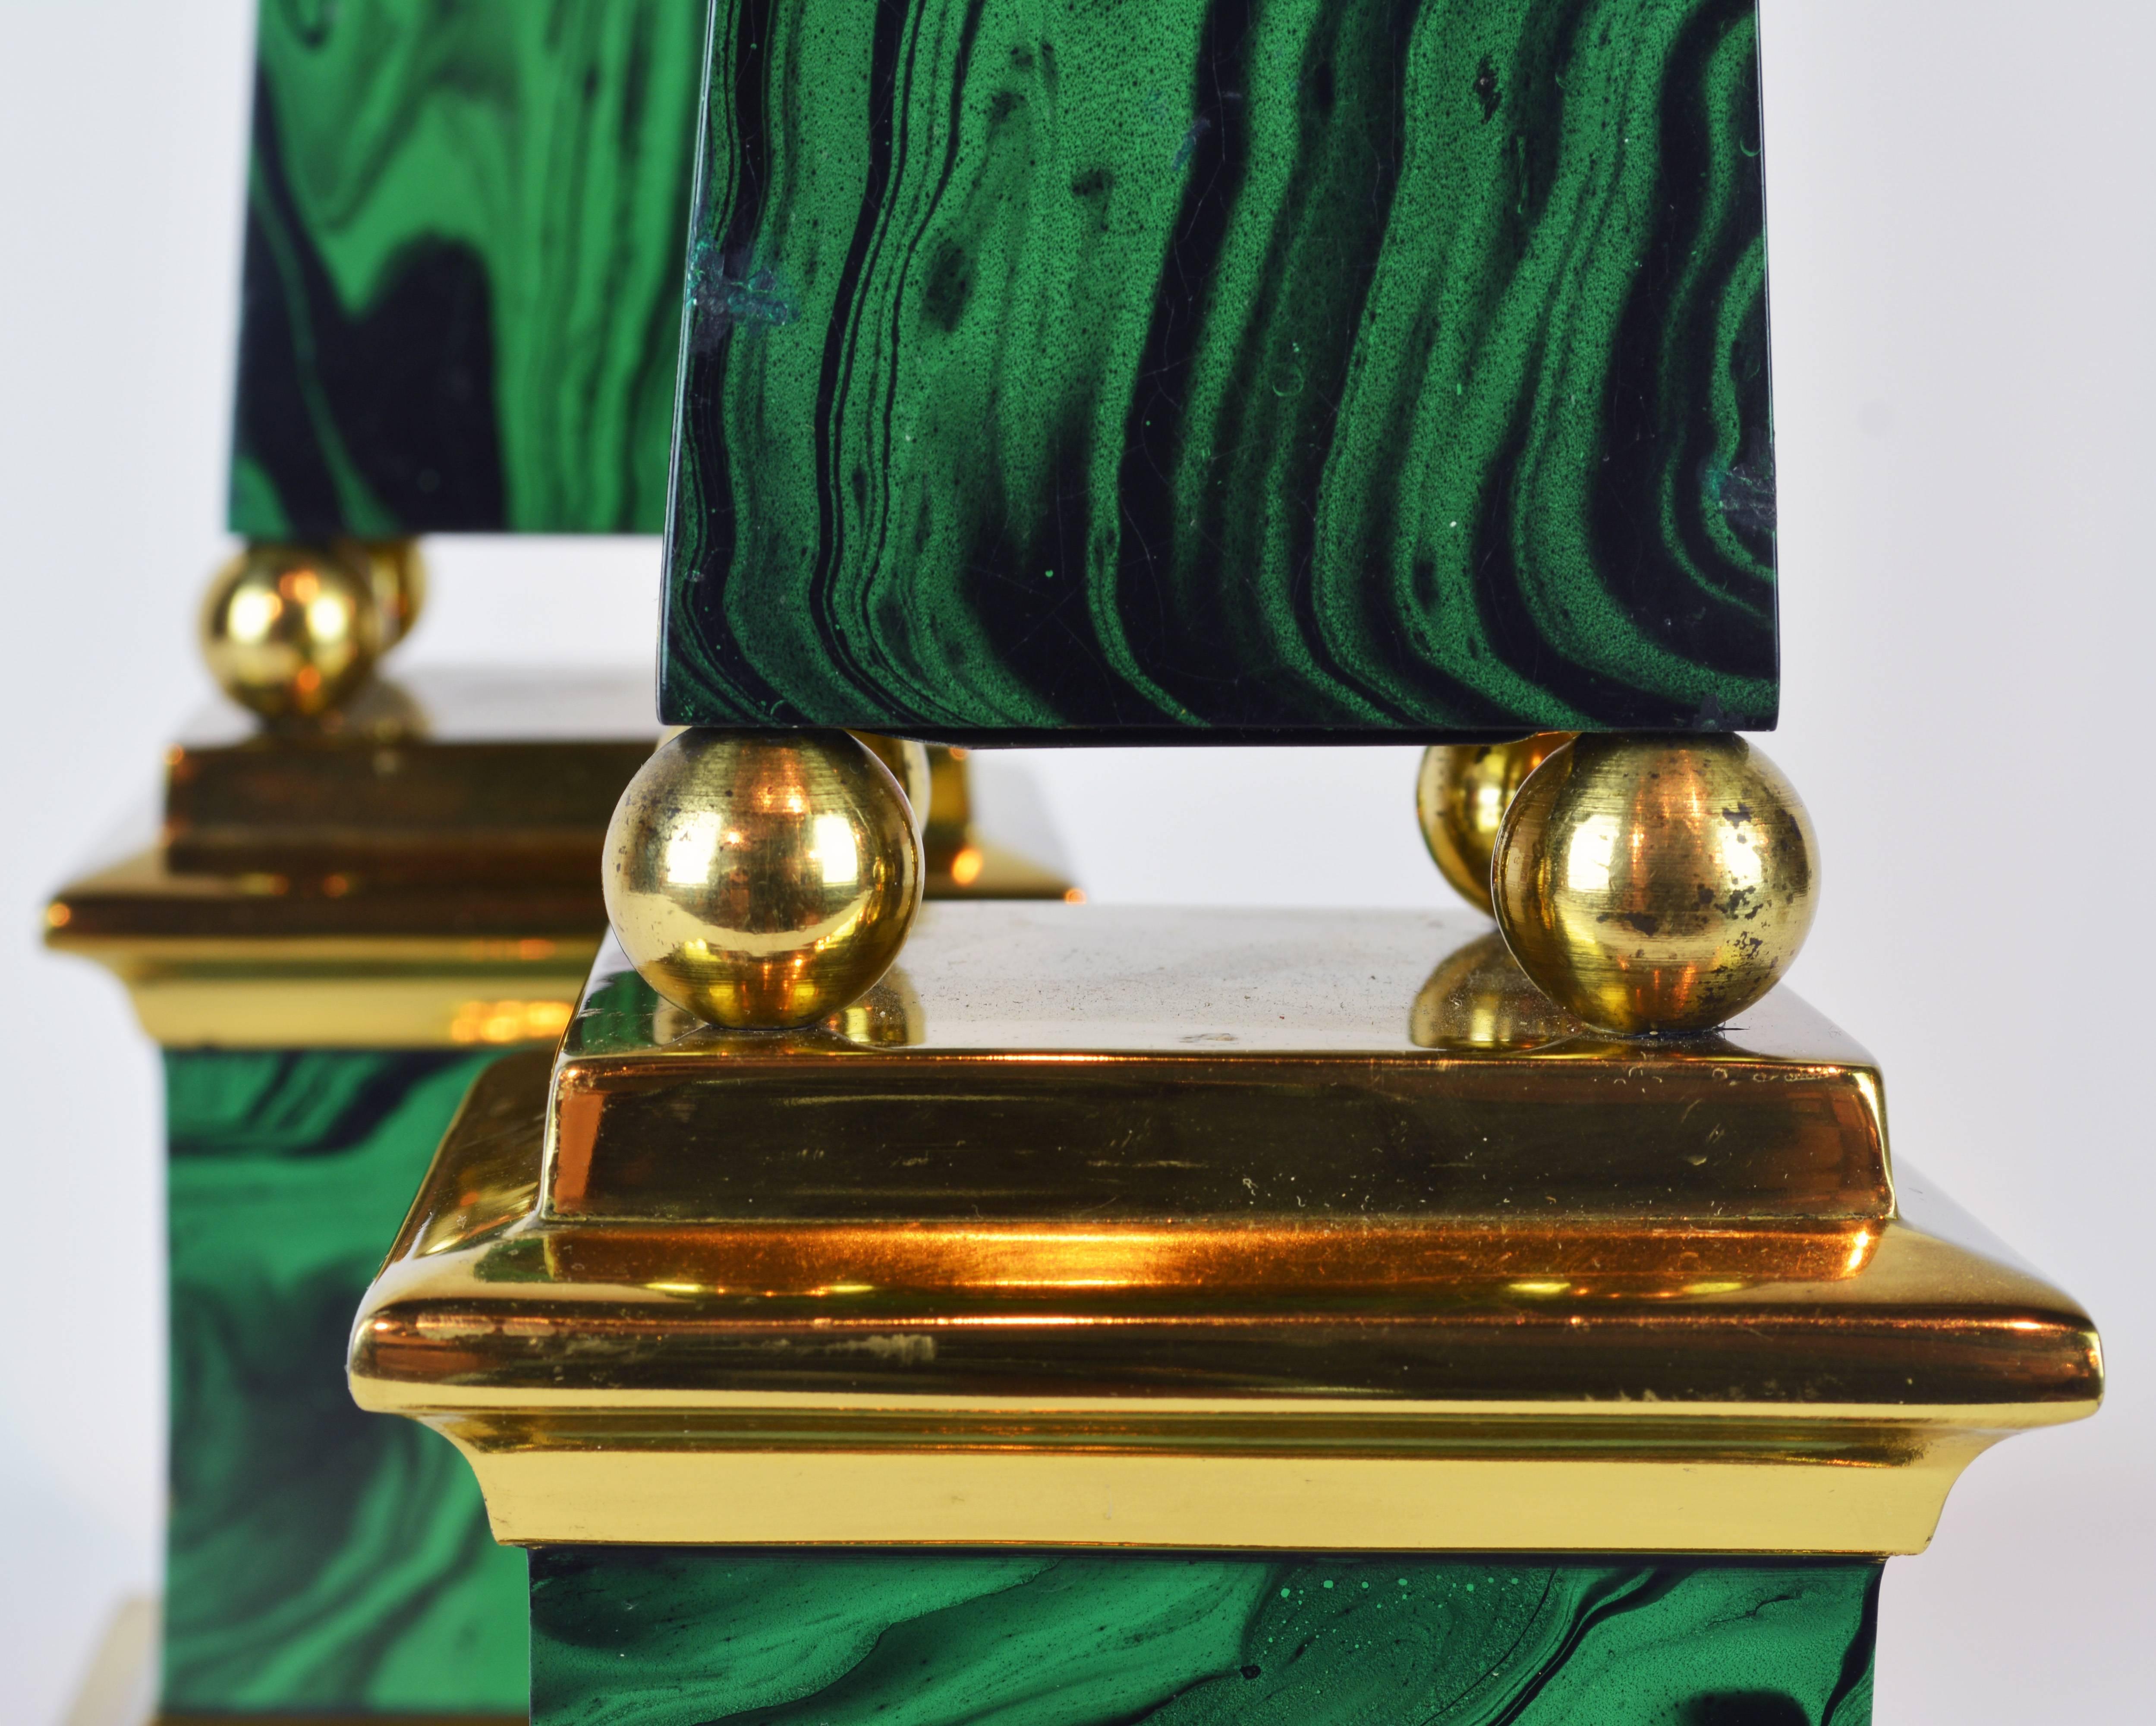 20th Century Pair of Tall Paul Hanson Midcentury Faux Malachite and Brass Obelisk Models